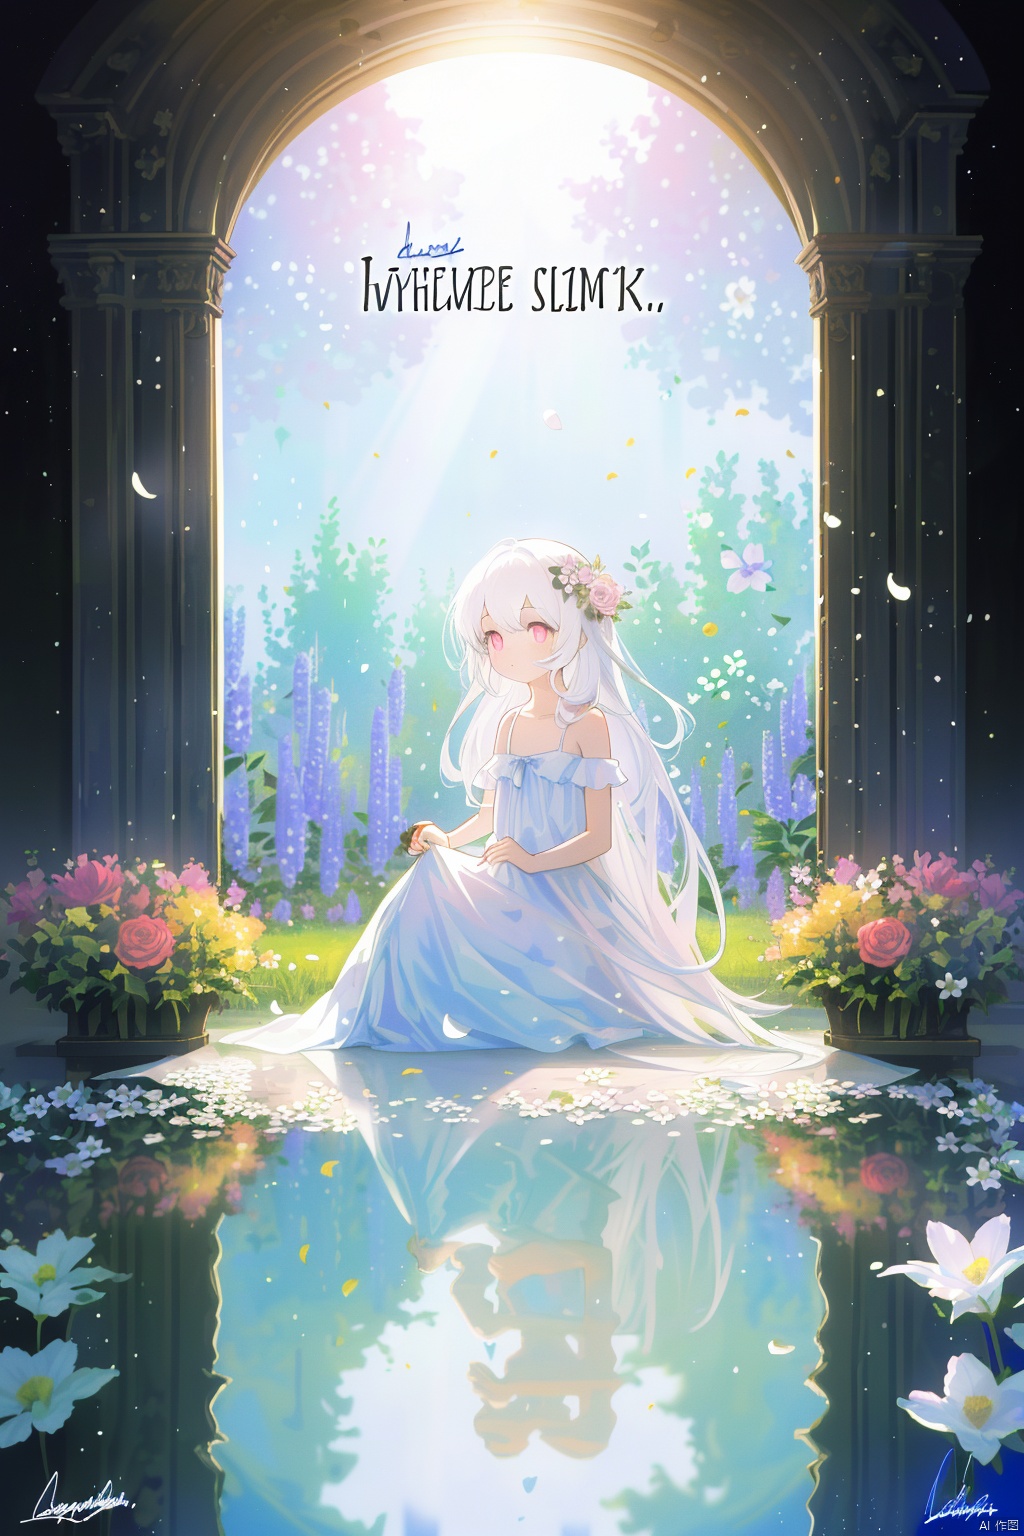 Best Quality, Masterpiece, Illustration, (Reflected Light), Unbelievable Ridiculousness, (Movie Poster), (Signature: 1.3), (English Text: 1.3), 1 Girl, Girl in the Flowers, White Hair, Hearts in the Eyes, Pink Eyes, Clear Sky, Outside, Collarbone, Loli, Sitting, Ridiculously Long Hair, Clear Cloth Edging, White Dress, Fantastic Landscape, Flower Field, Thousands of Flowers, Colorful Flowers, Flowers Around Her, Flowers of All Kinds